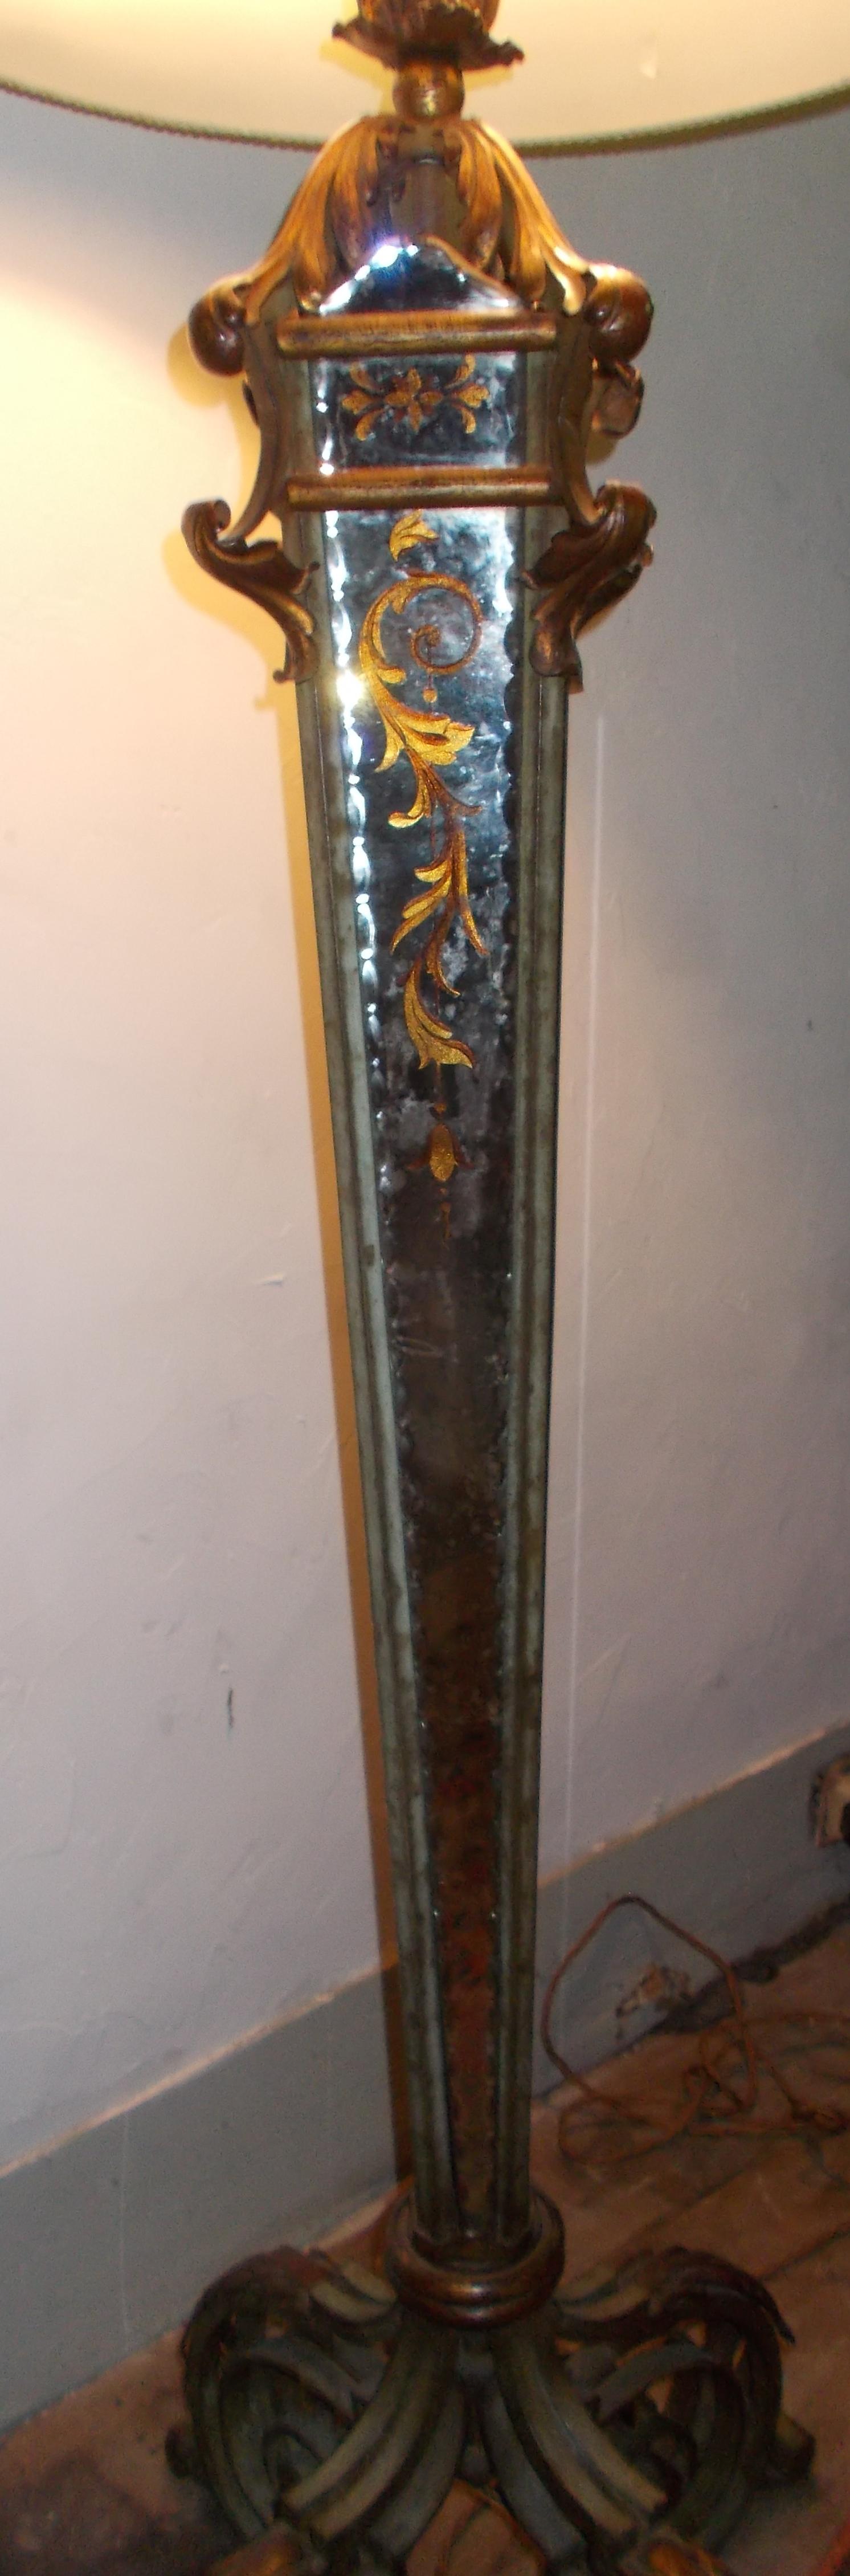 Glass Serge Roche Attributed Parcel-Gilt Wrought Iron and Verre Églomisé Floor Lamp For Sale